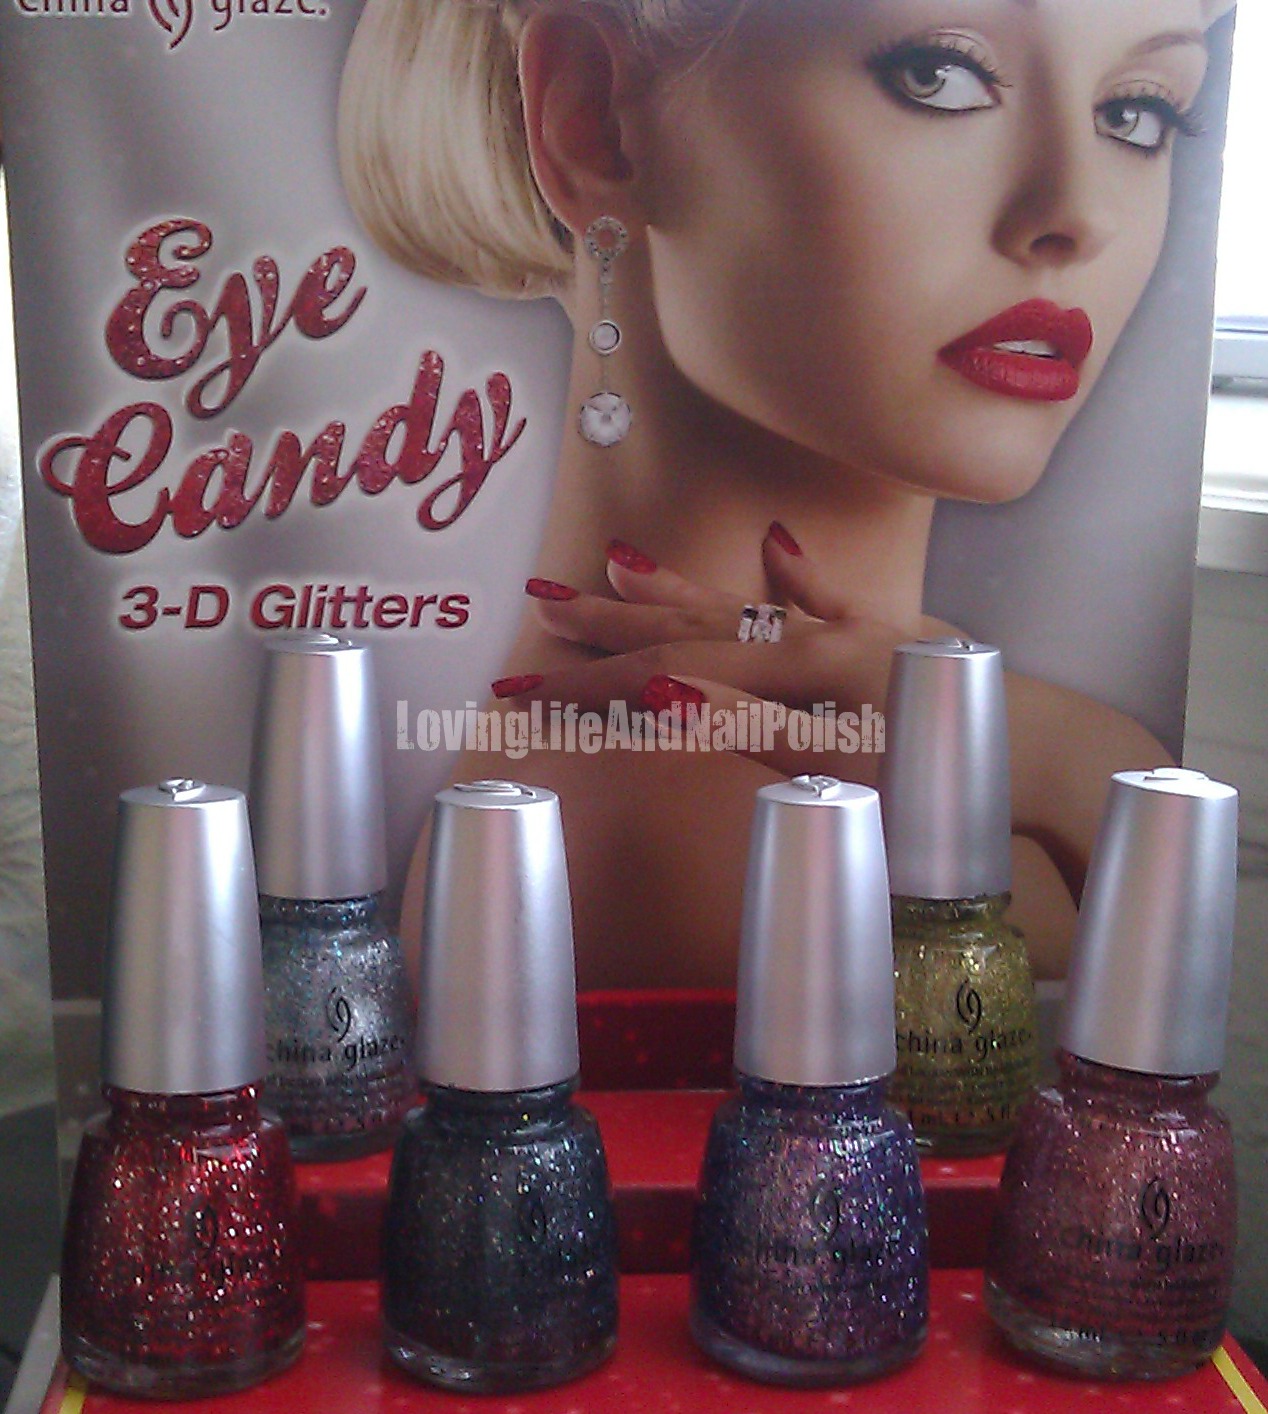 If you love glitter nail polish and Marilyn Monroe this is the Collection